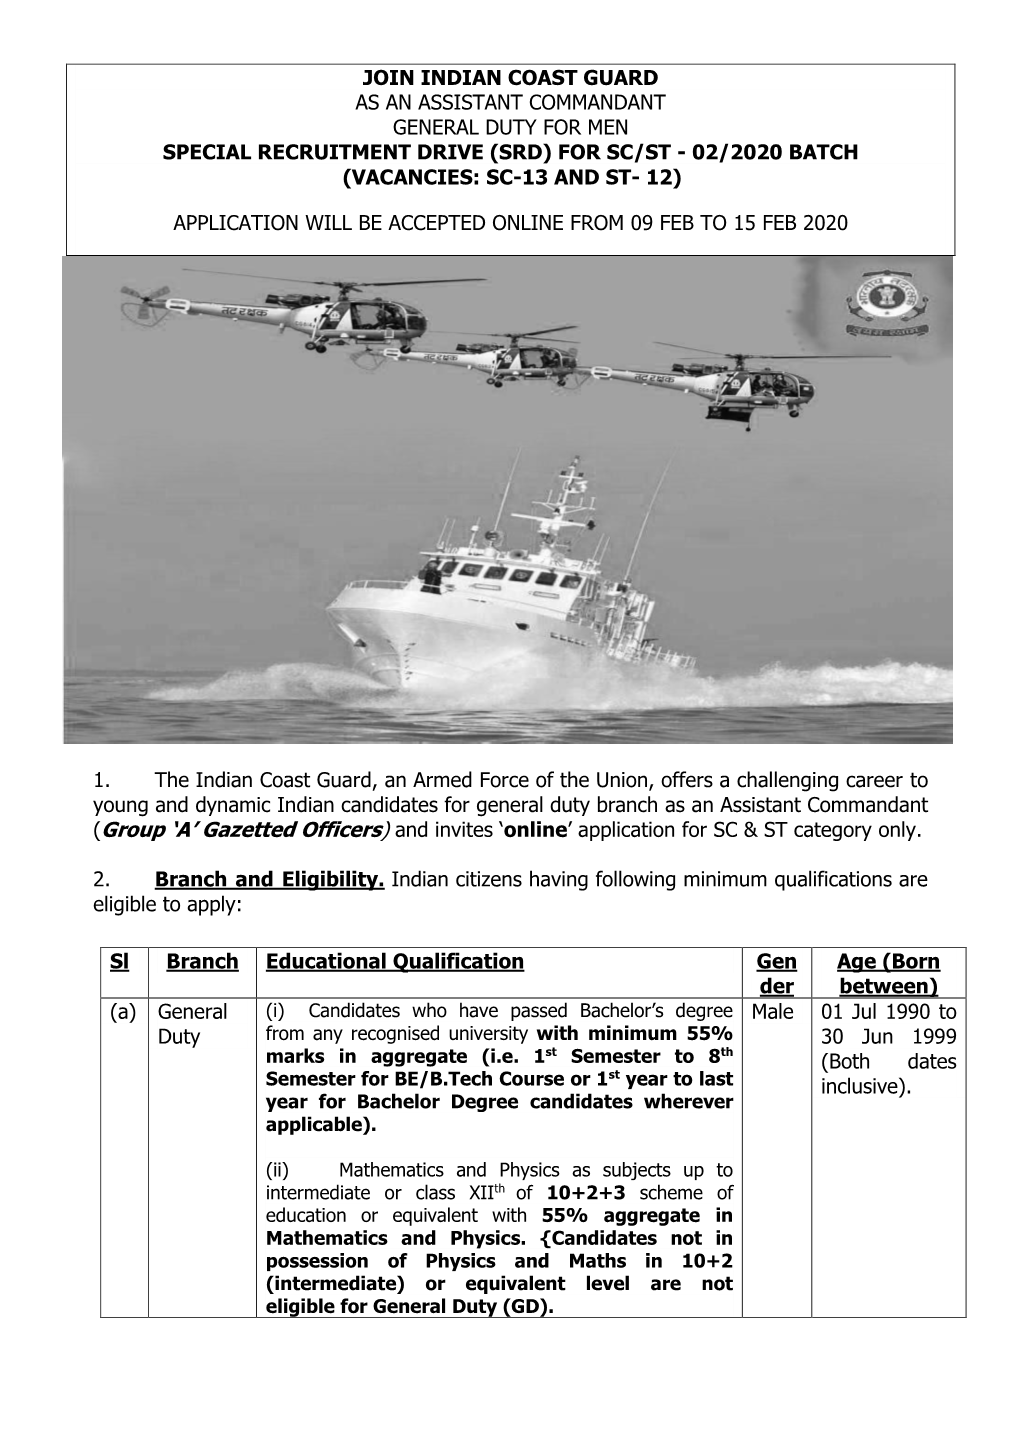 1. the Indian Coast Guard, an Armed Force of the Union, Offers A